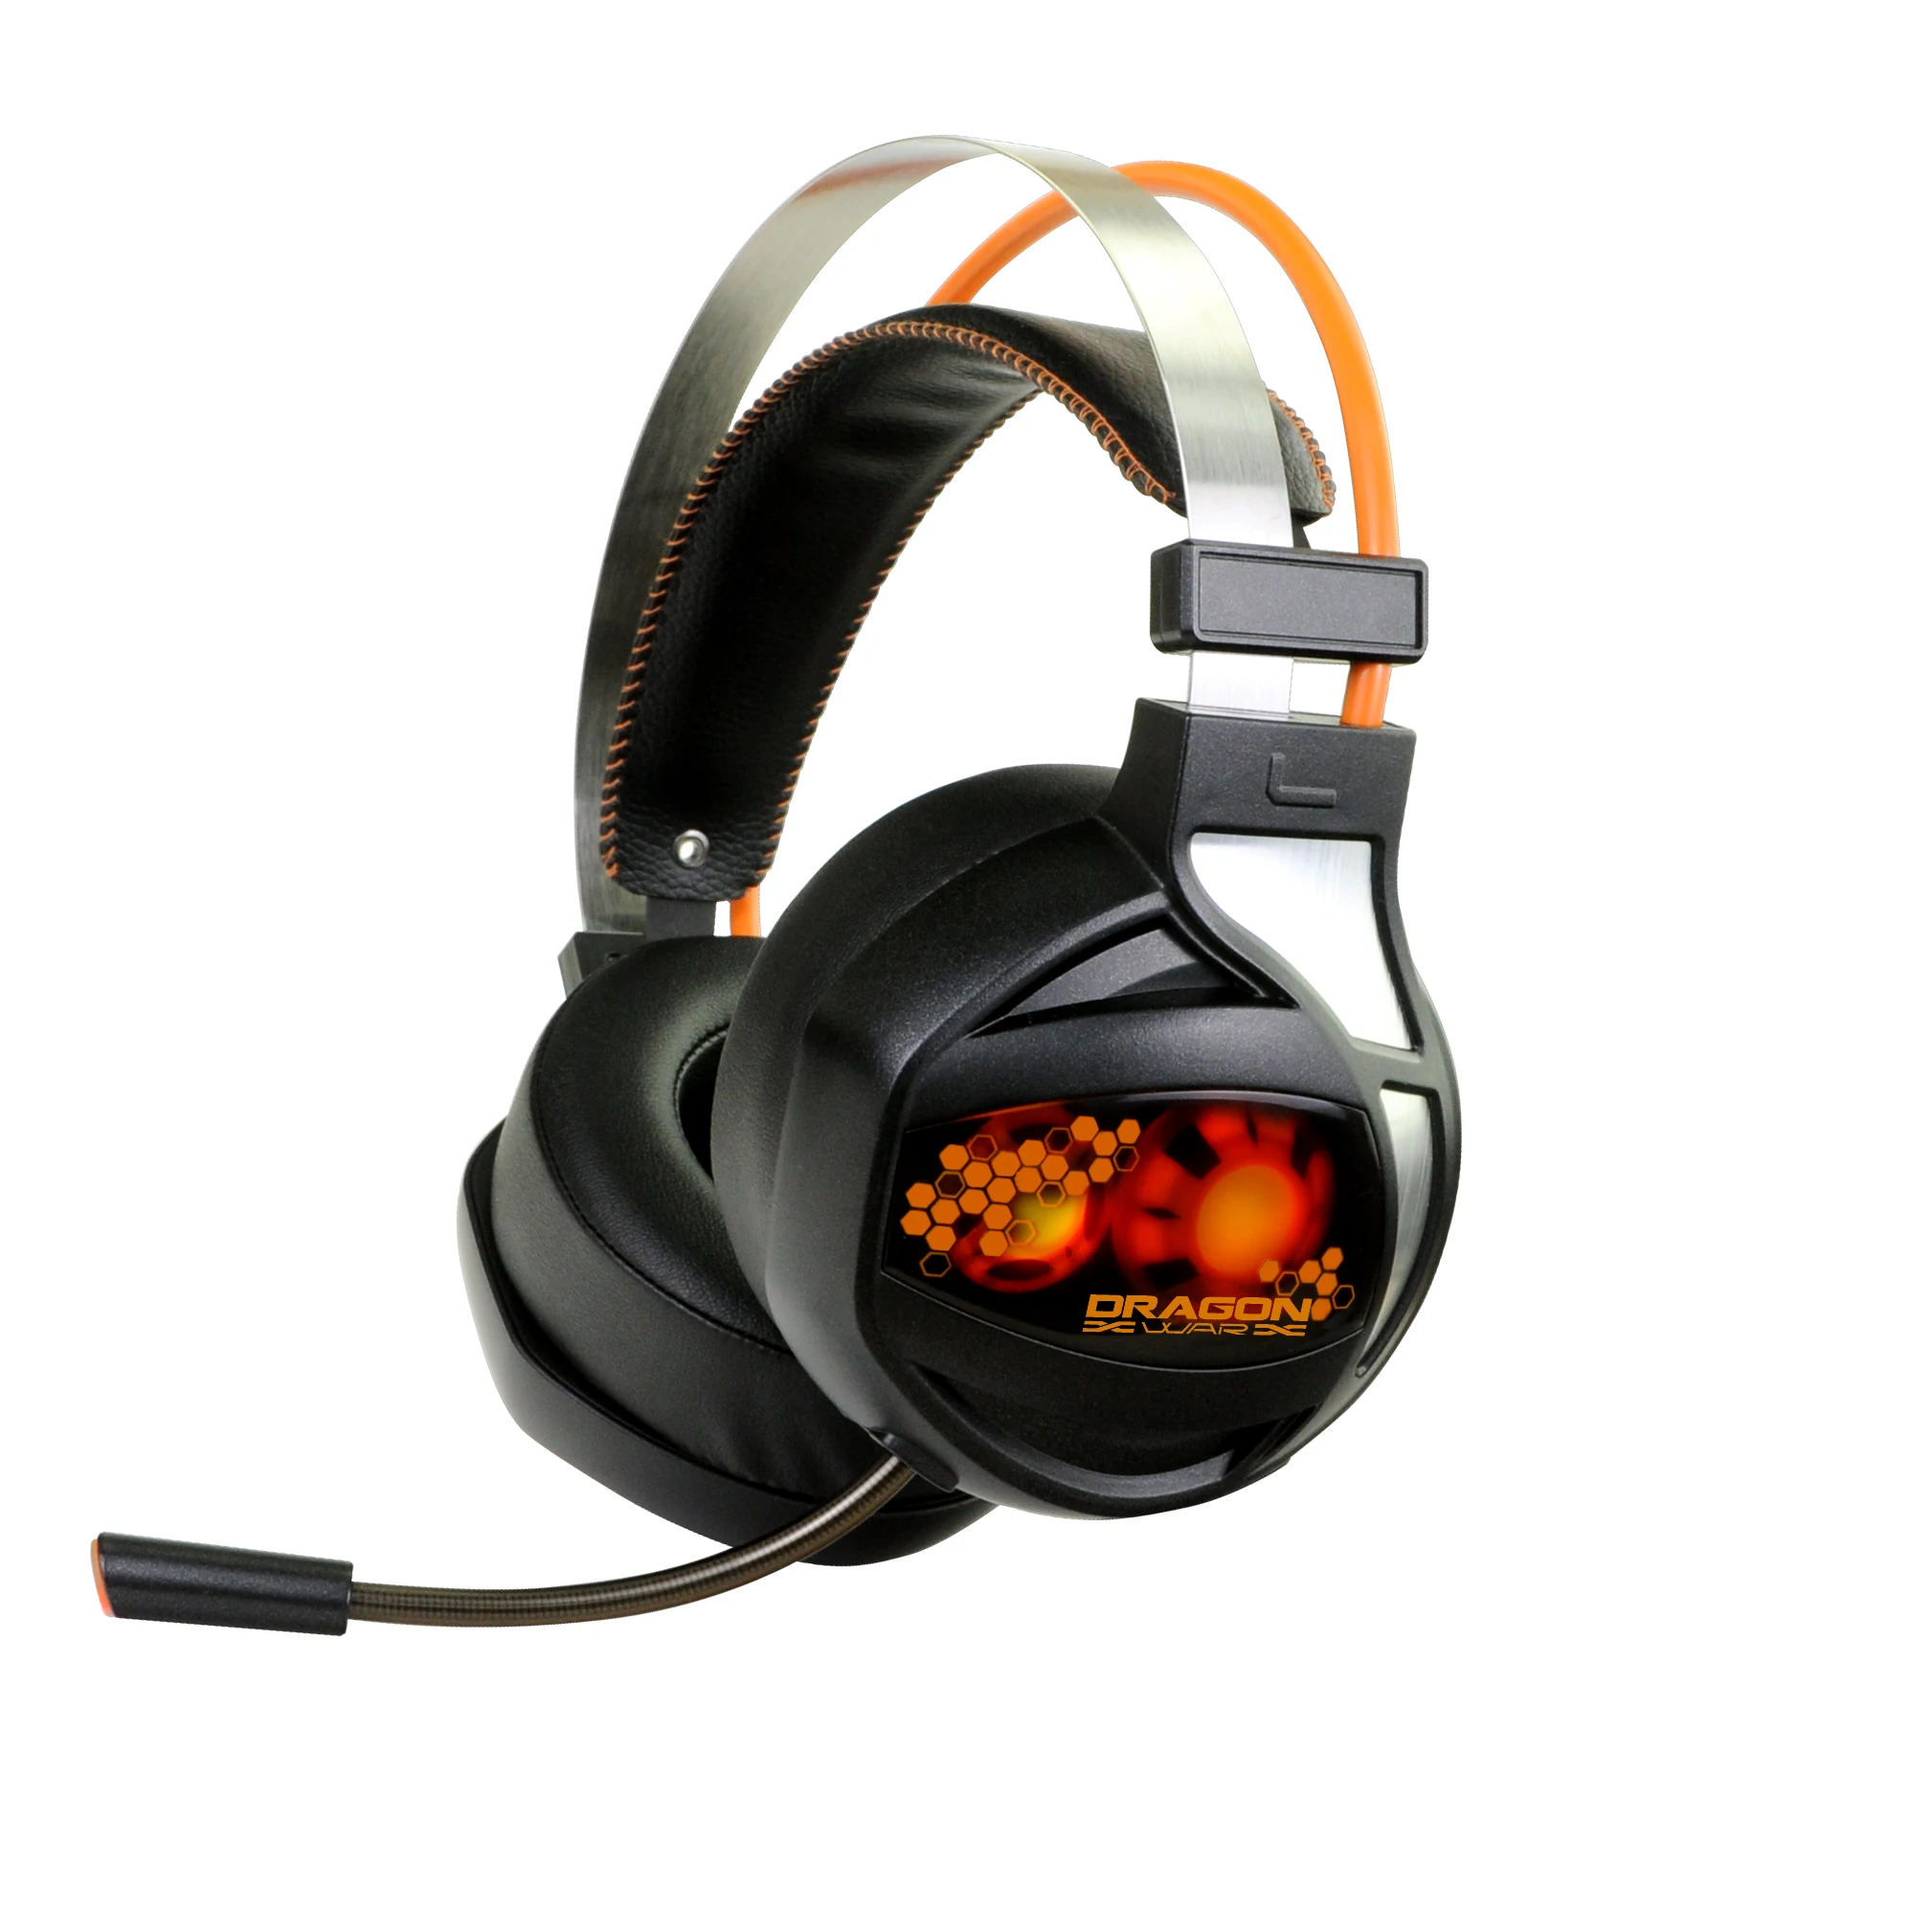 New model Comfort light big XL size LED 7.1 vibration sound gaming overhead wired gaming headset with microphone